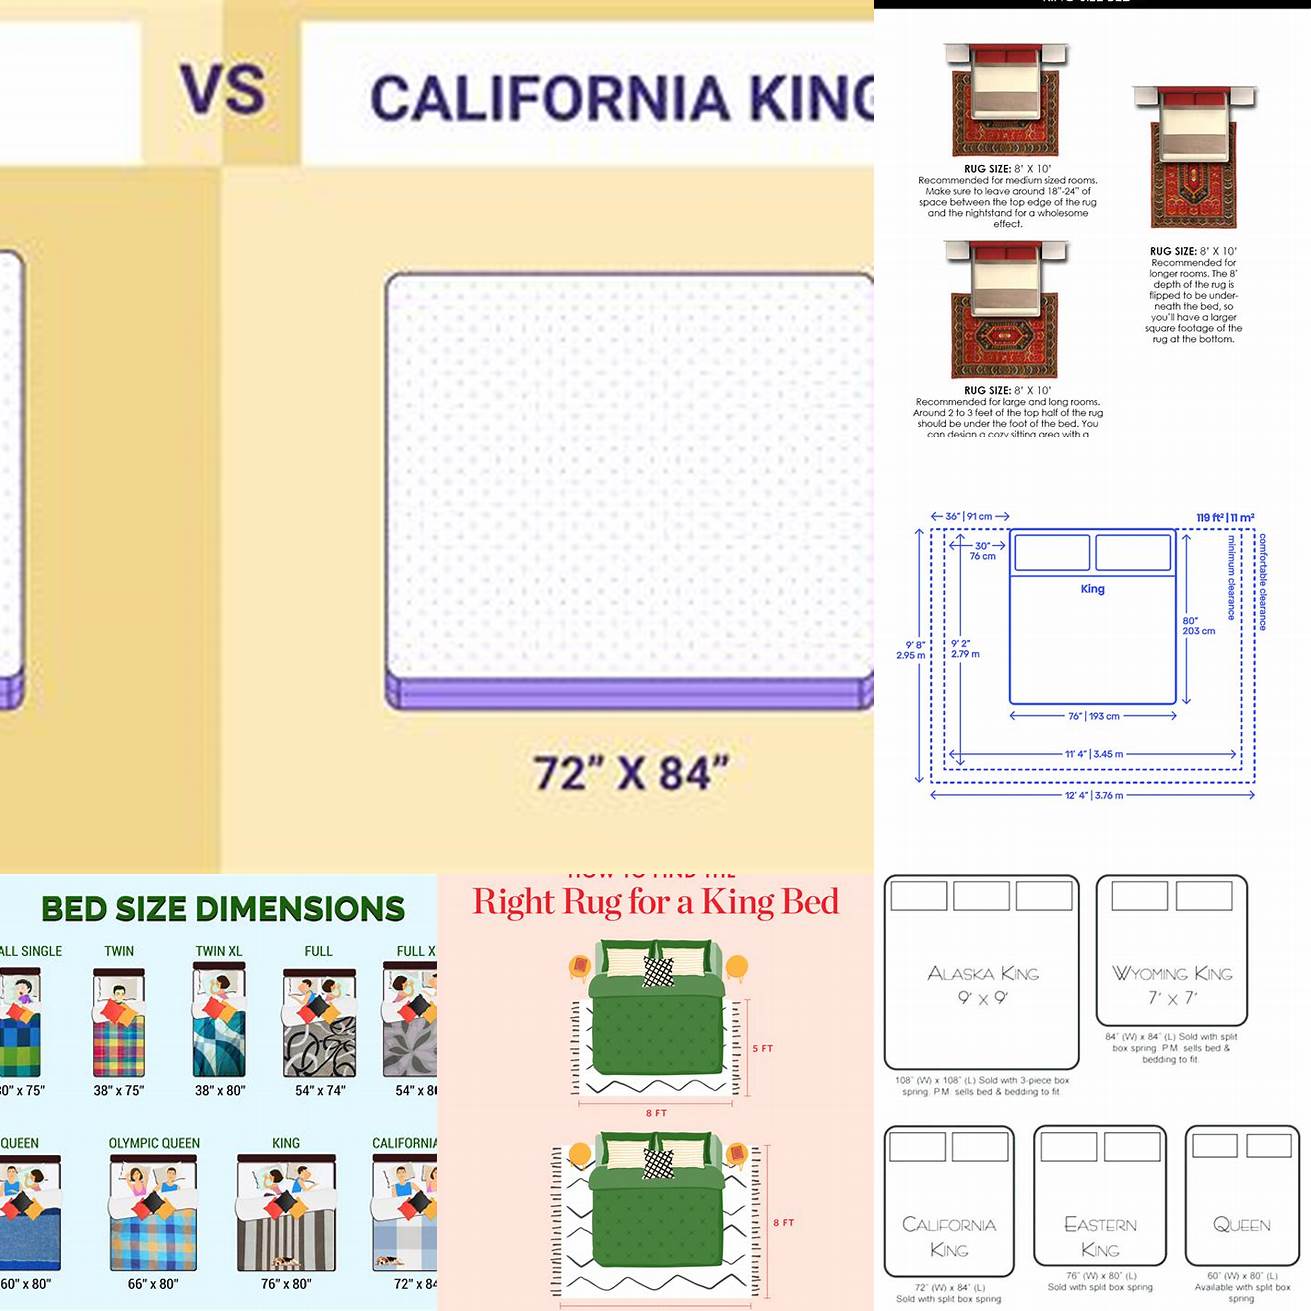 Measure your bedroom to make sure a California King Bed will fit properly